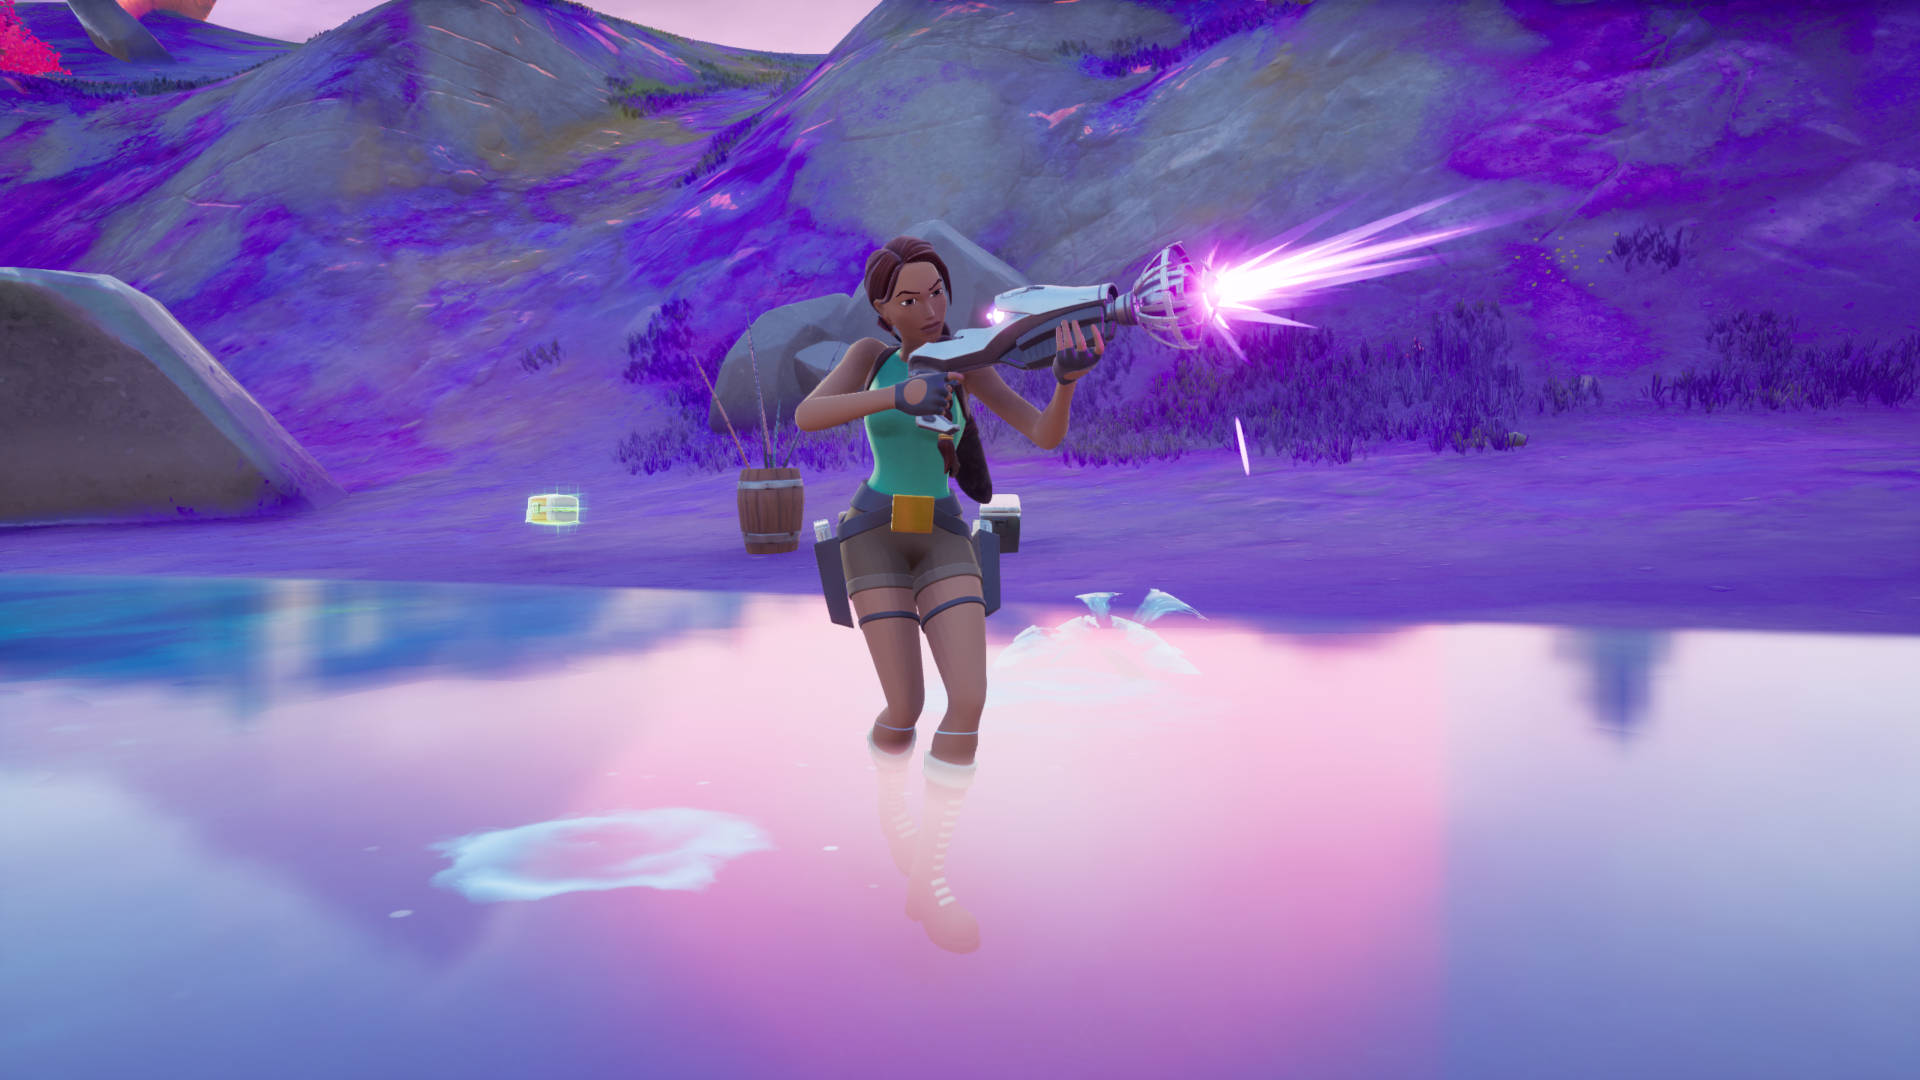 Fortnite aliens: how to get alien weapons and fly UFOs